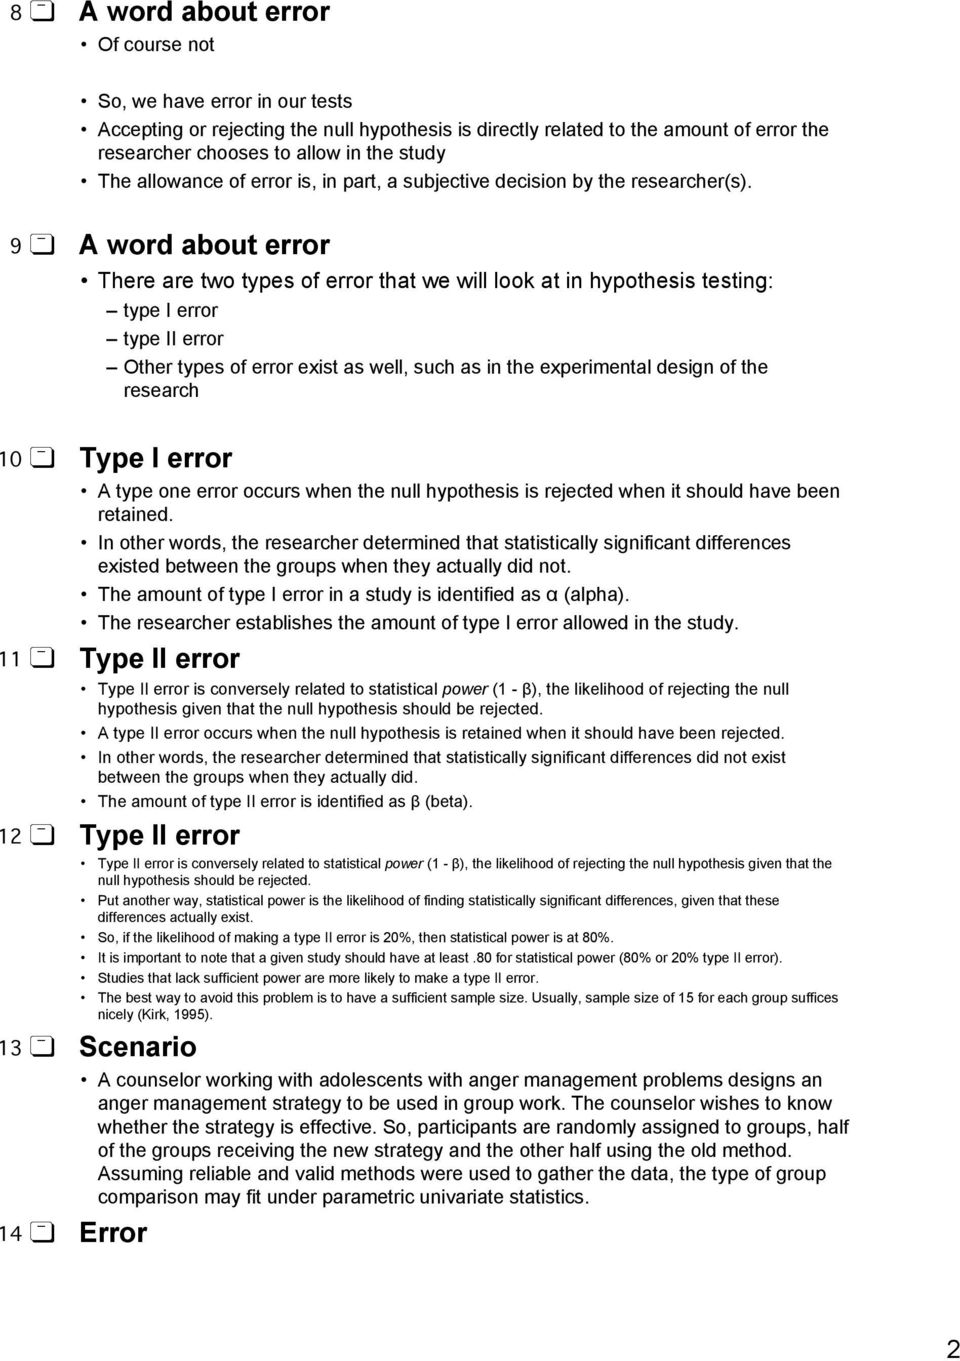 9 A word about error There are two types of error that we will look at in hypothesis testing: type I error type II error Other types of error exist as well, such as in the experimental design of the